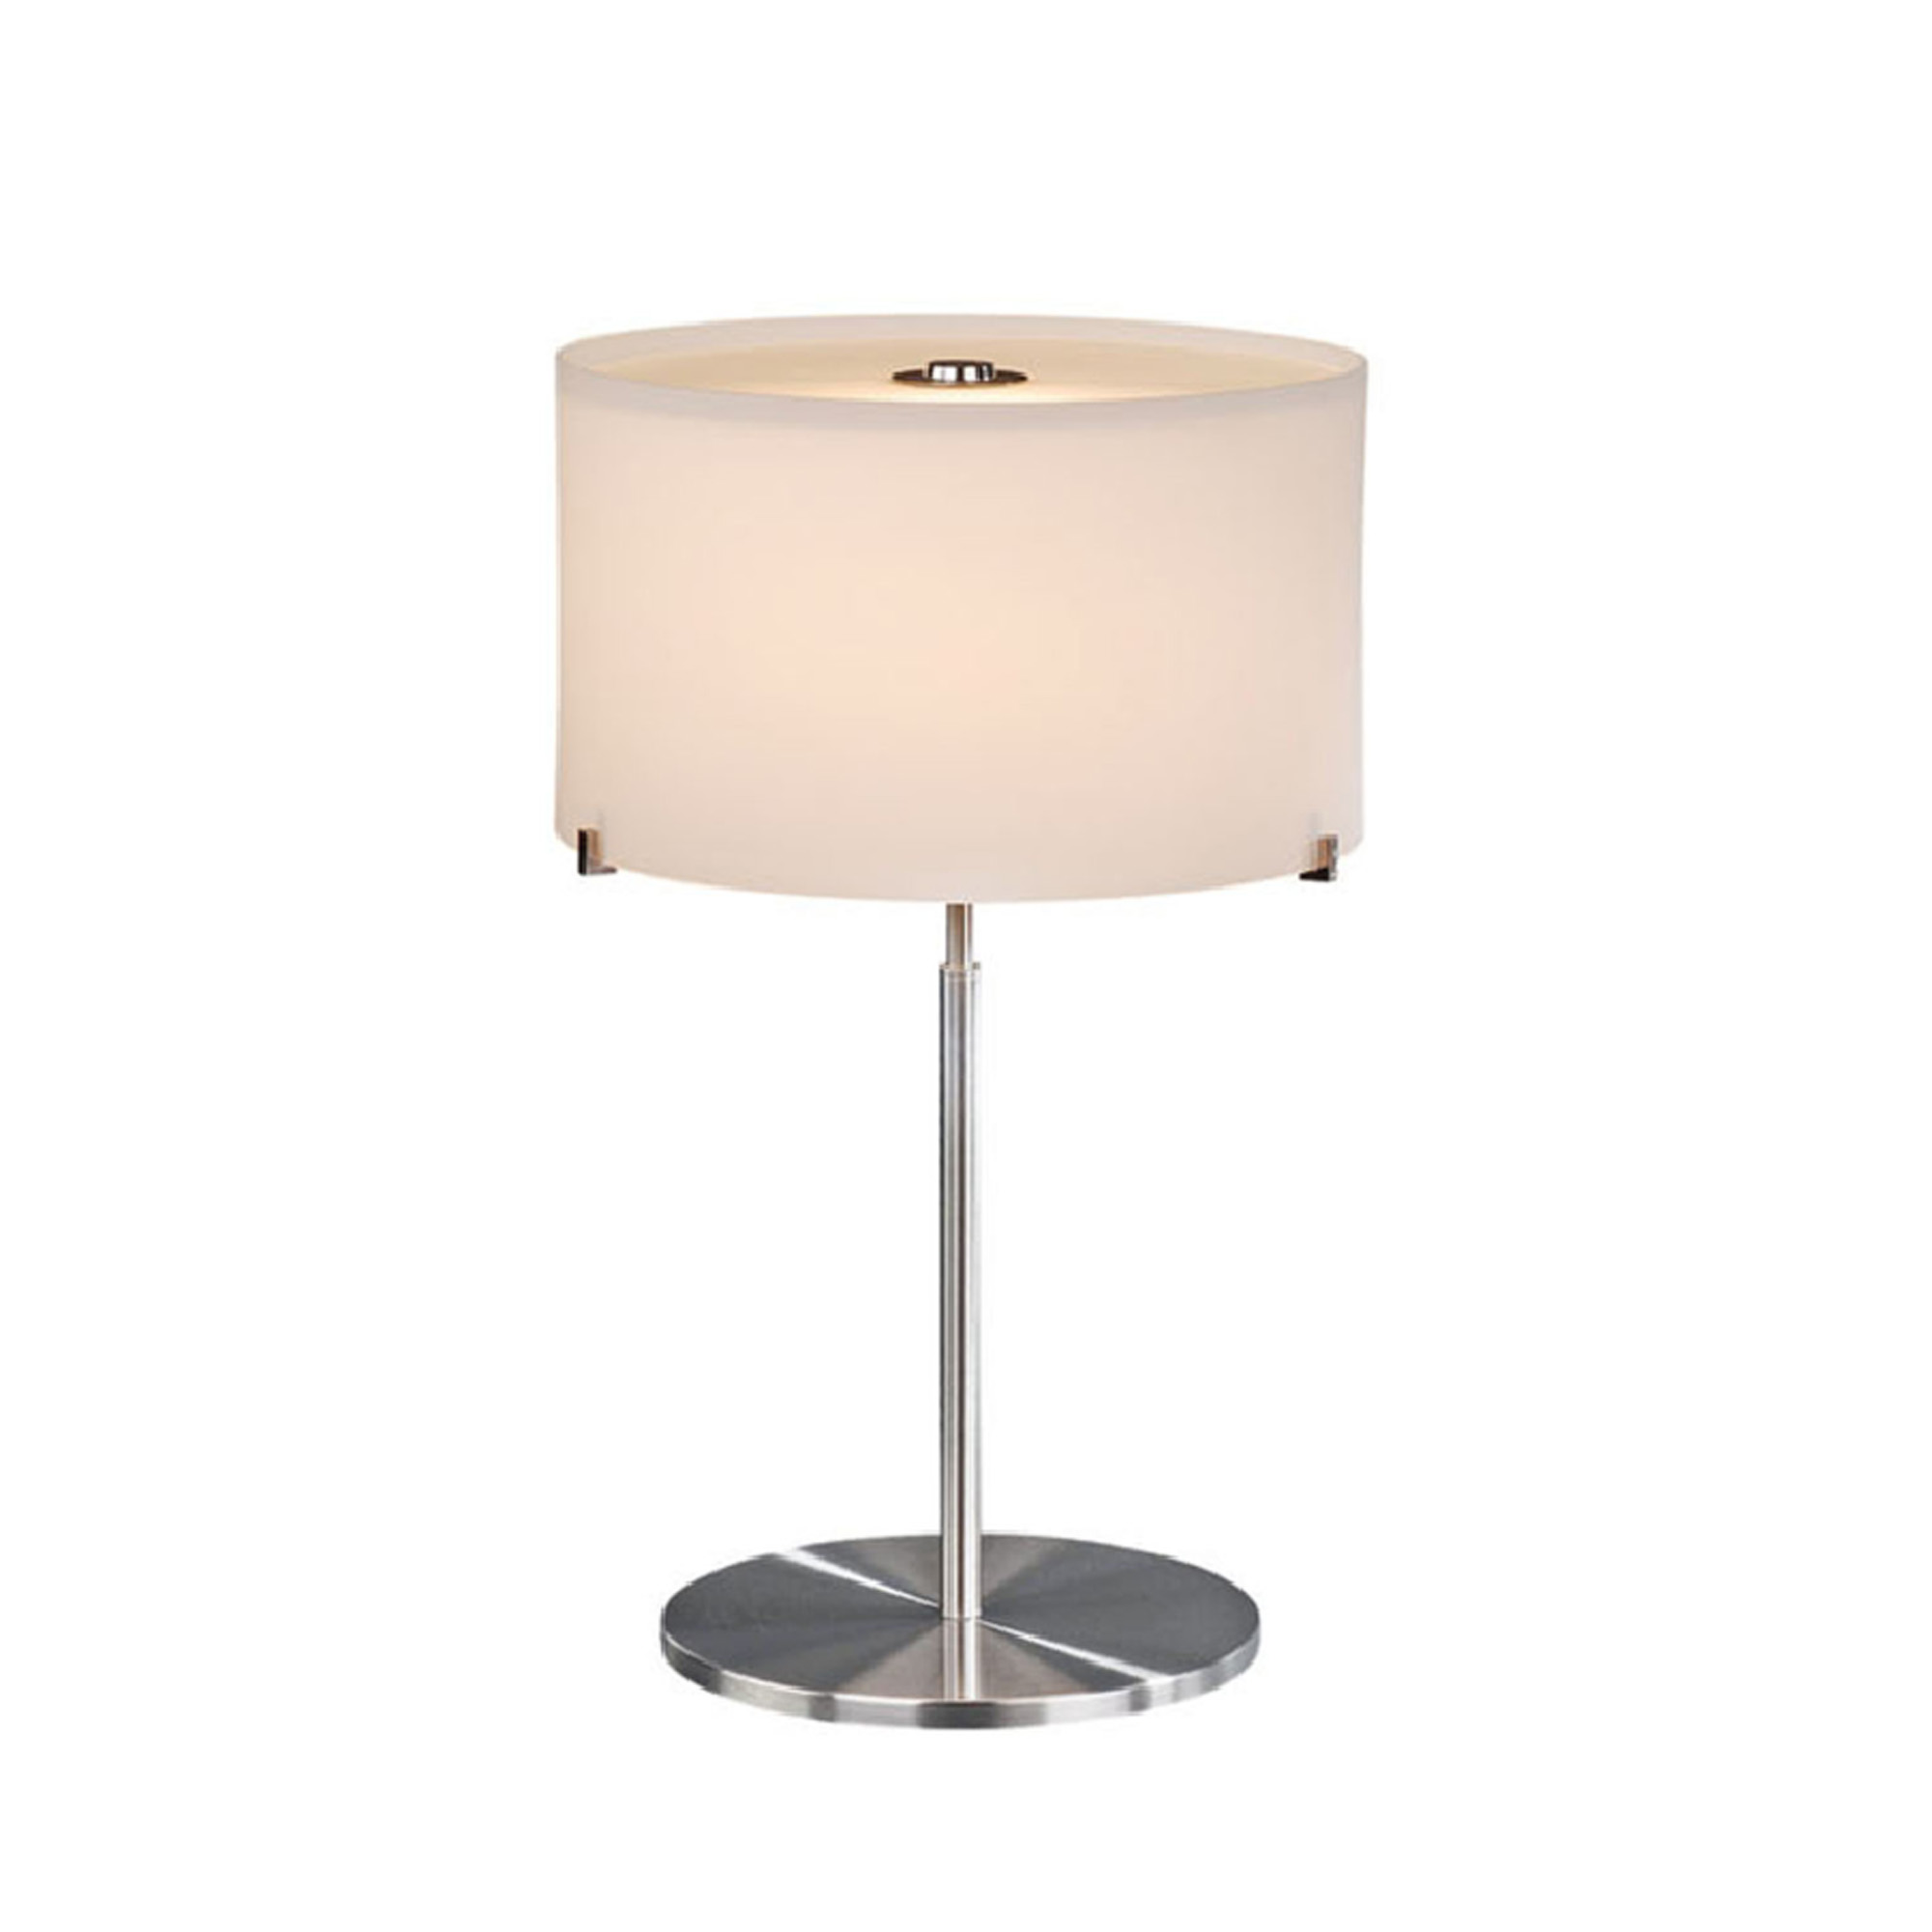 table lamp for living room DT049-WH-1.Item No.DT049-WH                2.table lamp for living room DT049-WH            3.Indoor use only              4. Offer customer the lowest price with high quality